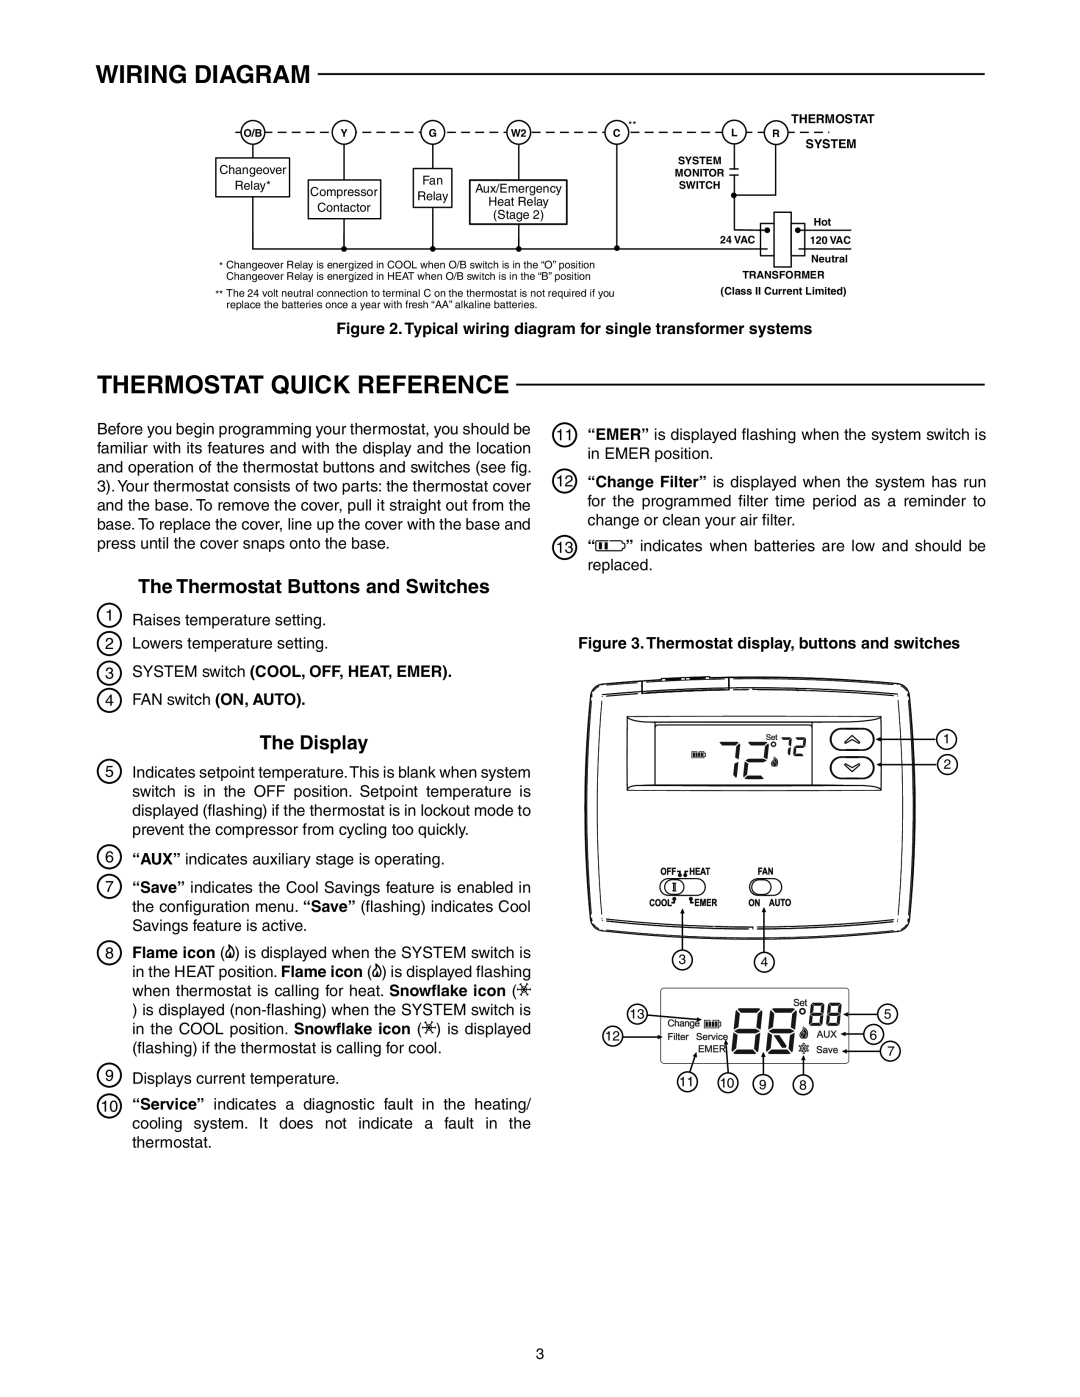 White Rodgers 1F89-0211 Wiring Diagram, Thermostat Quick Reference, The Thermostat Buttons and Switches, The Display 